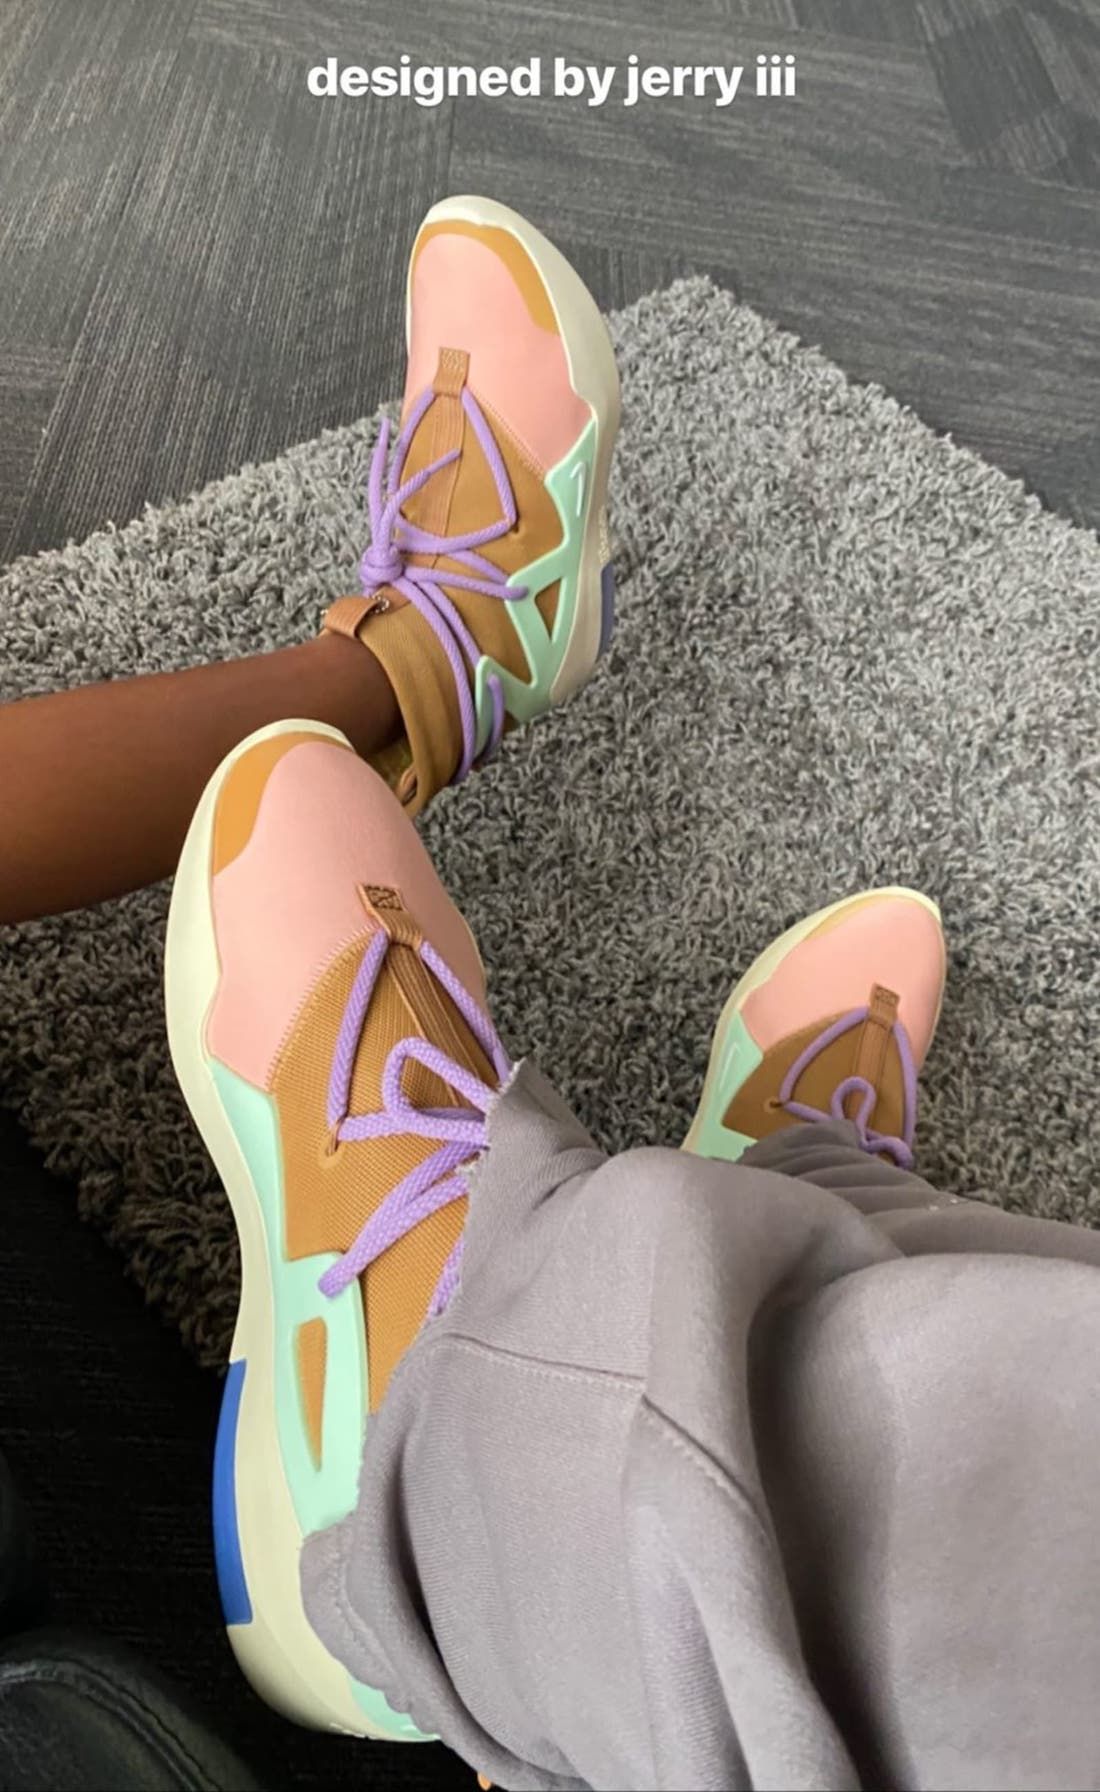 Jerry Lorenzo’s Son Teases Nike Air Fear of God Colourway 